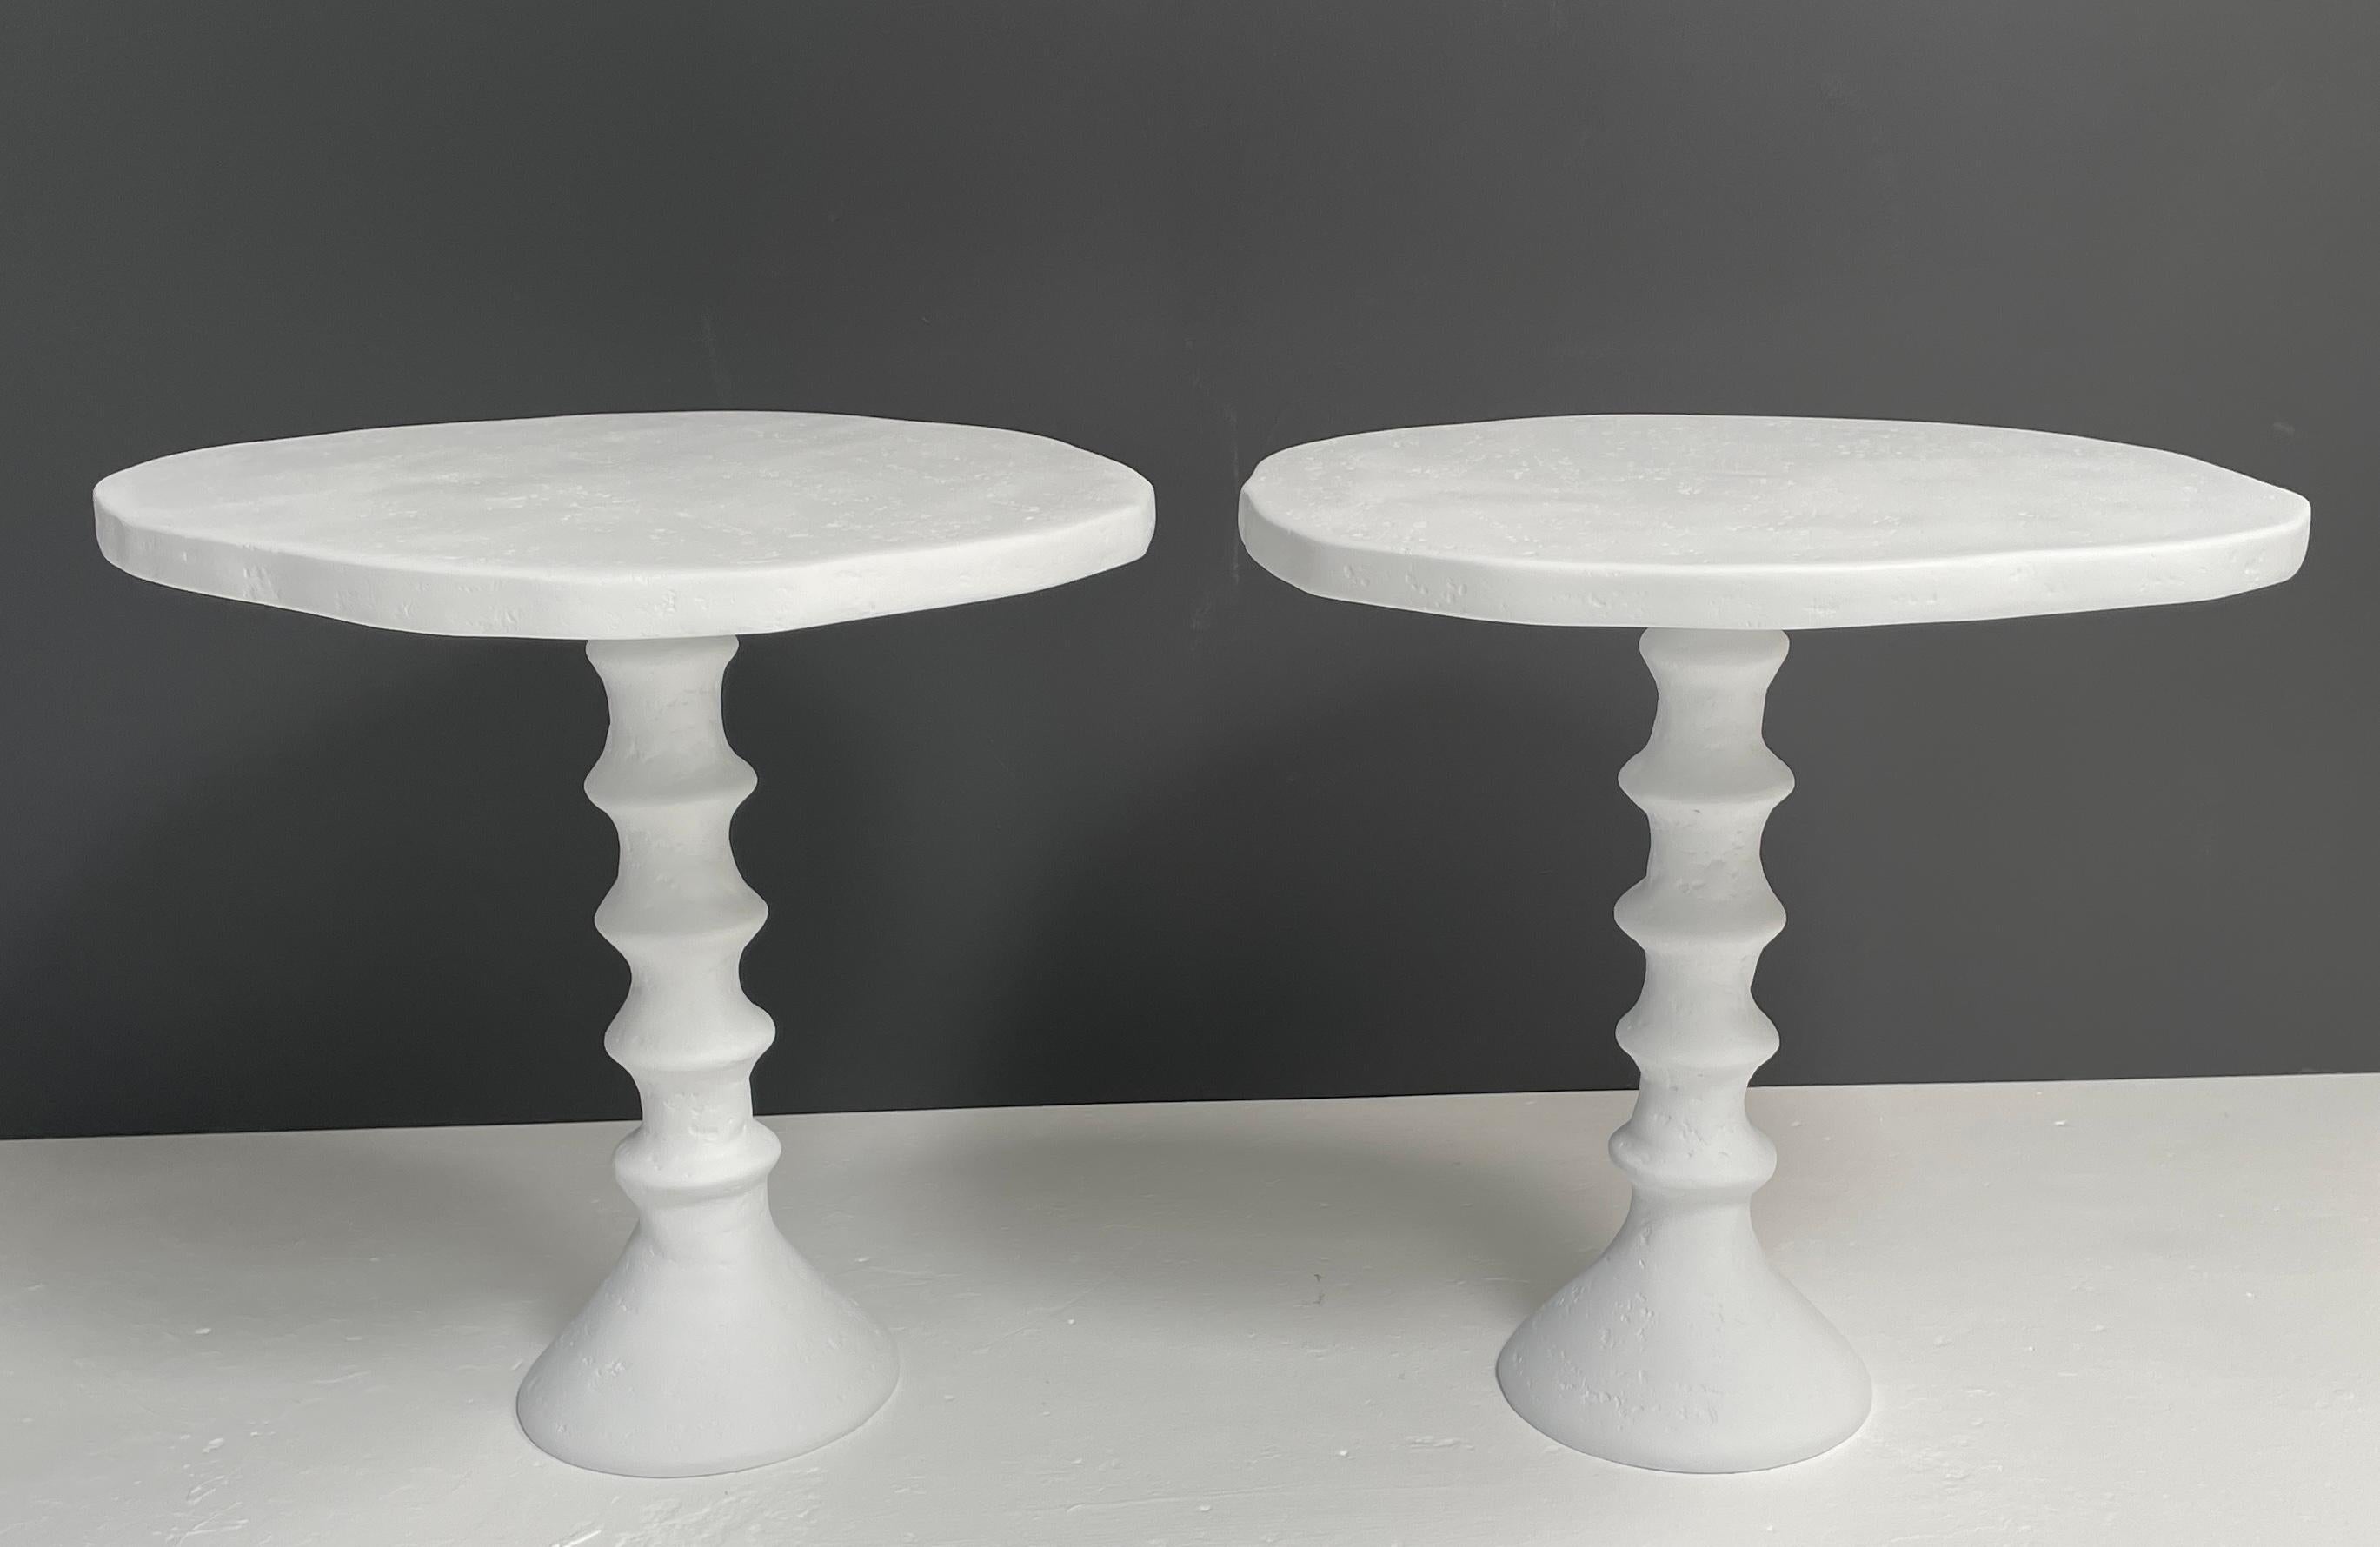 Organic in shape, this plaster side table with its pedestal base is a unique piece and very versatile. This medium scale side table works well in both traditional and modern interiors. The handcrafted plaster is beautiful in its natural white